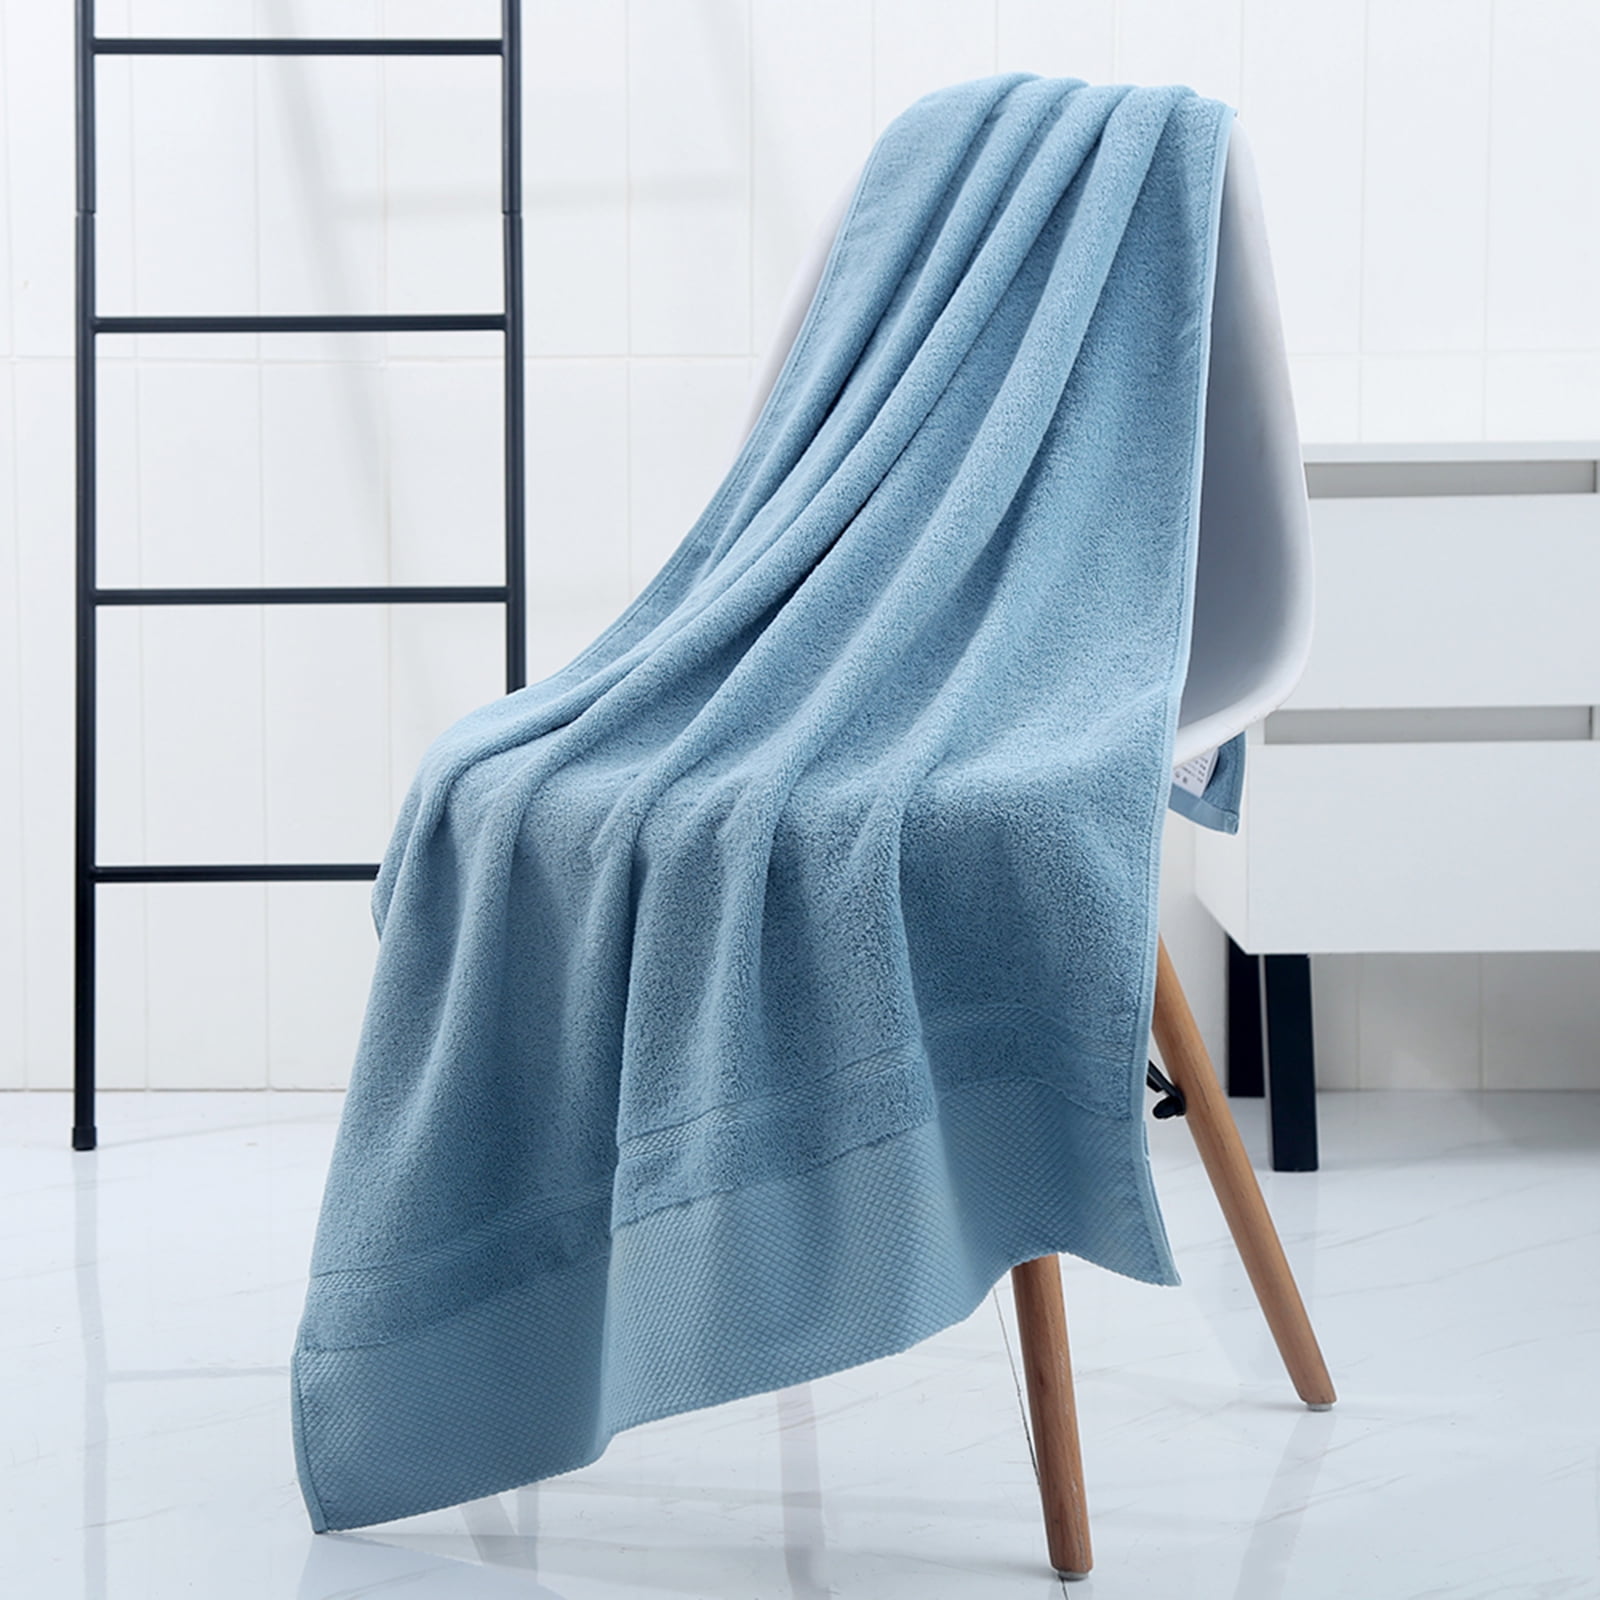 MintLimit 140*70CM Bath Towel Extra Large family bath towel Thick, Soft,  Pure color Plush and Highly Absorbent Luxury Hotel & Spa Quality Towels X1  Blue 